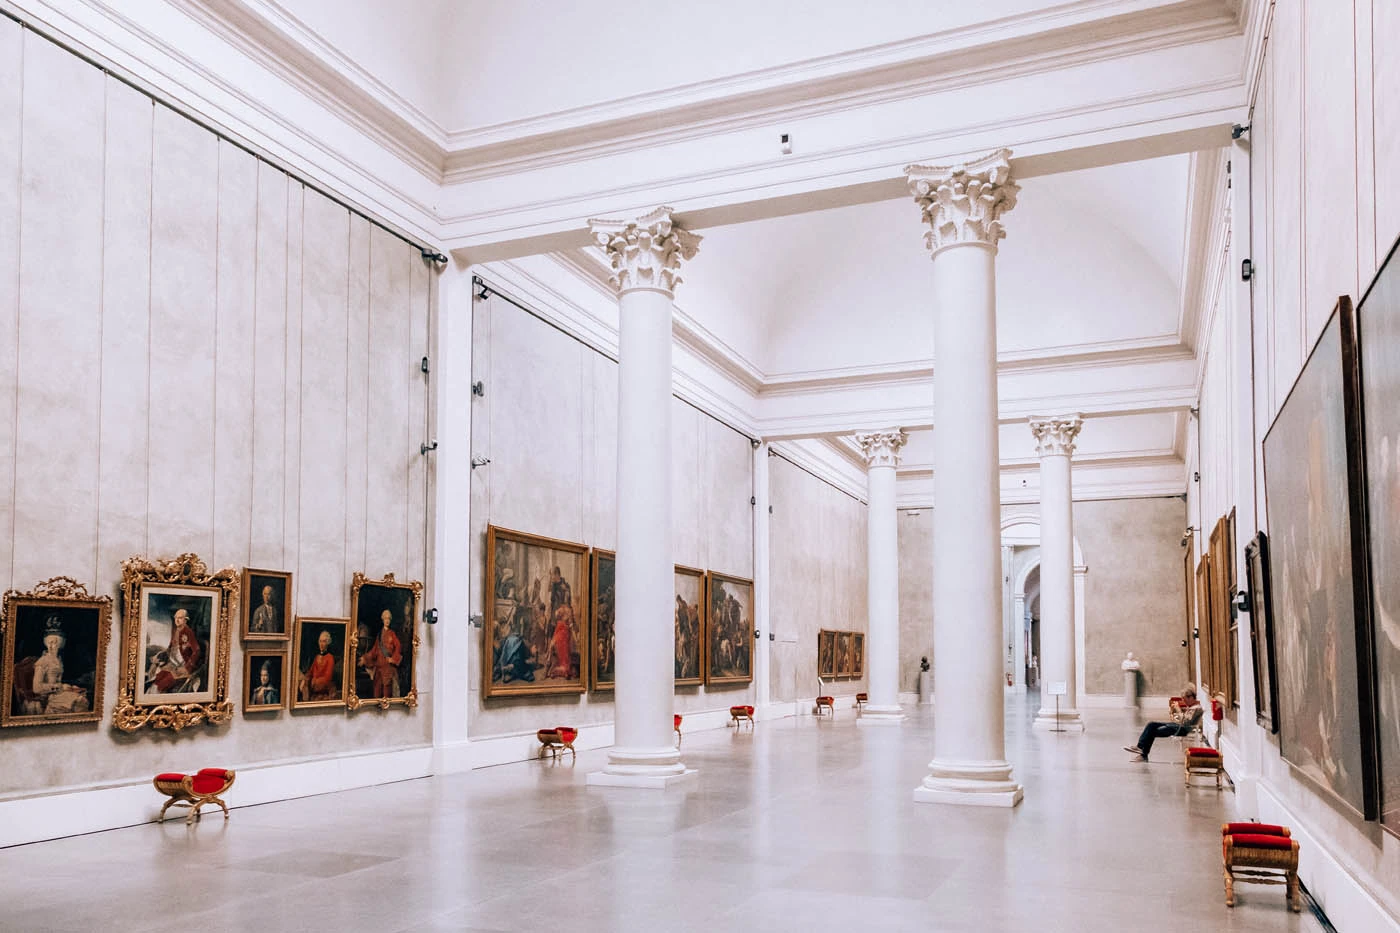 BEST Things to do in Parma Italy - National Gallery - Galleria Nazionale di Parma - Large room with white columns